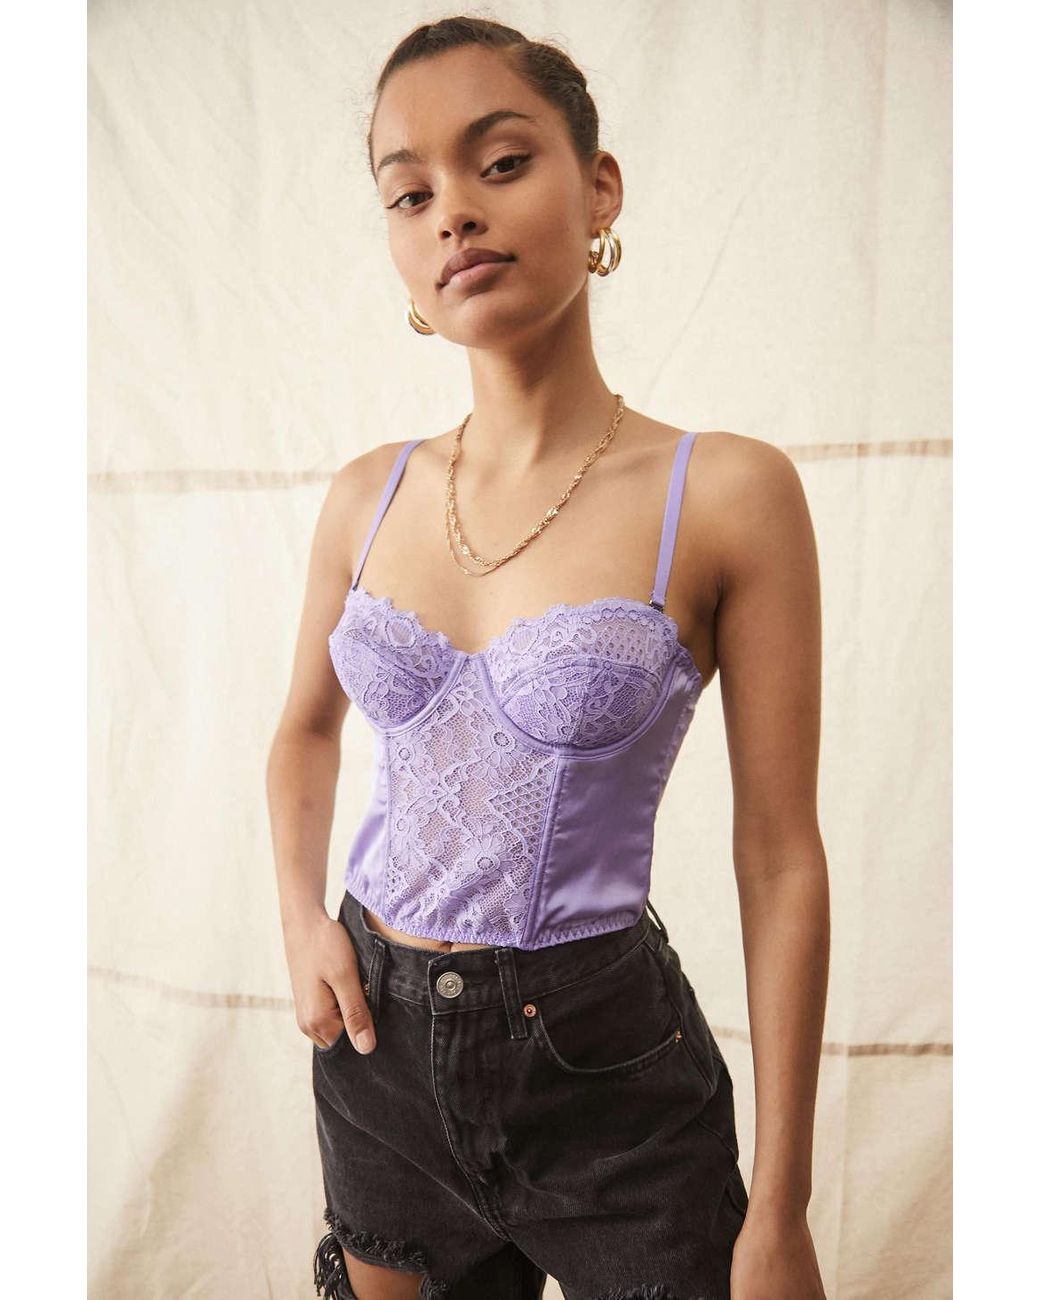 Urban Outfitters Uo Ava Lace & Satin Corset Top in Purple